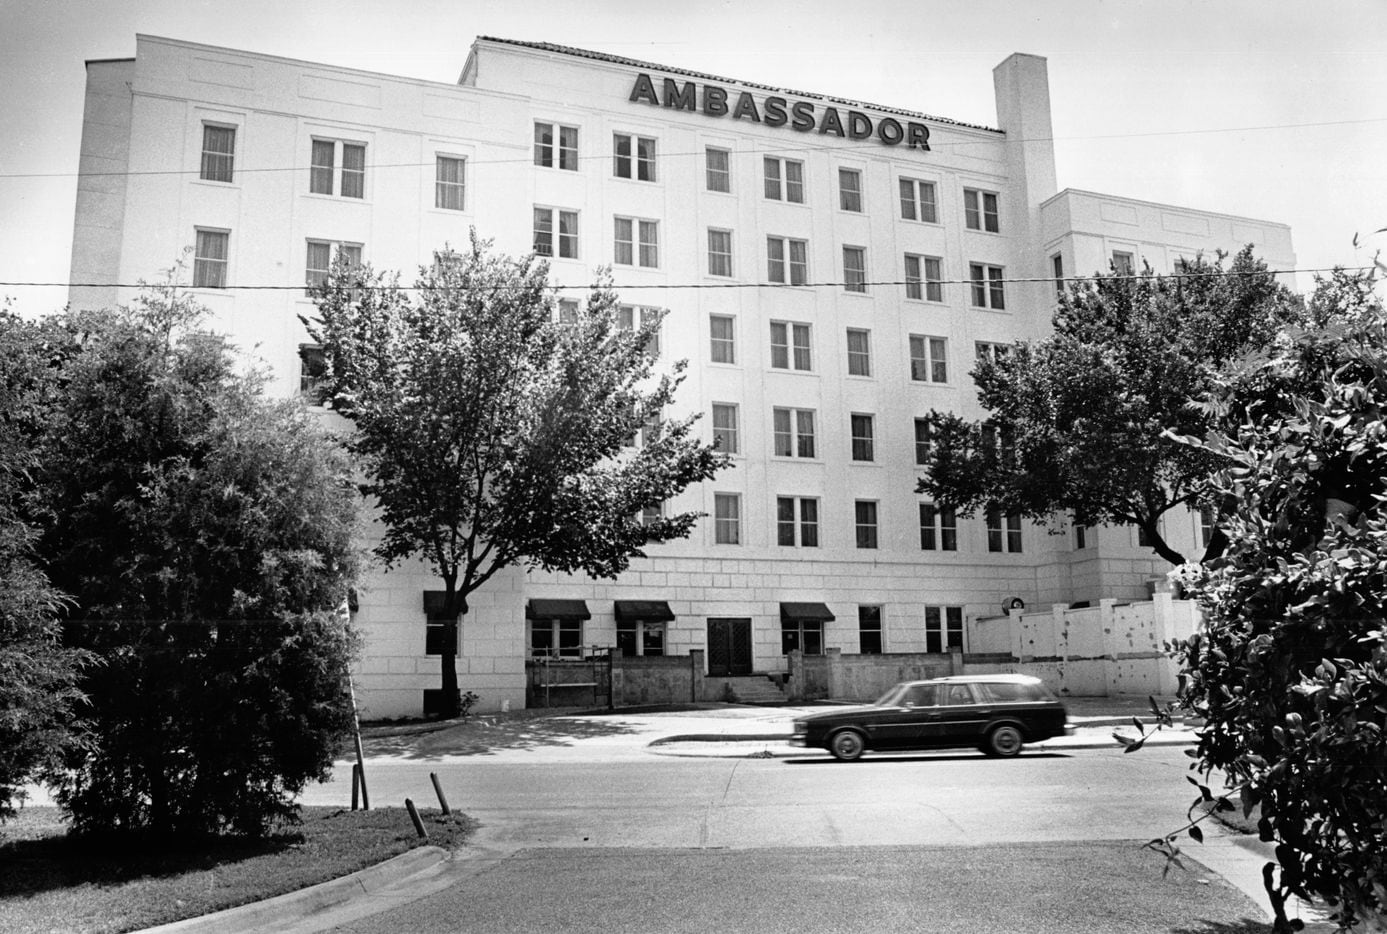 The Ambassador Hotel, seen in July 1983.